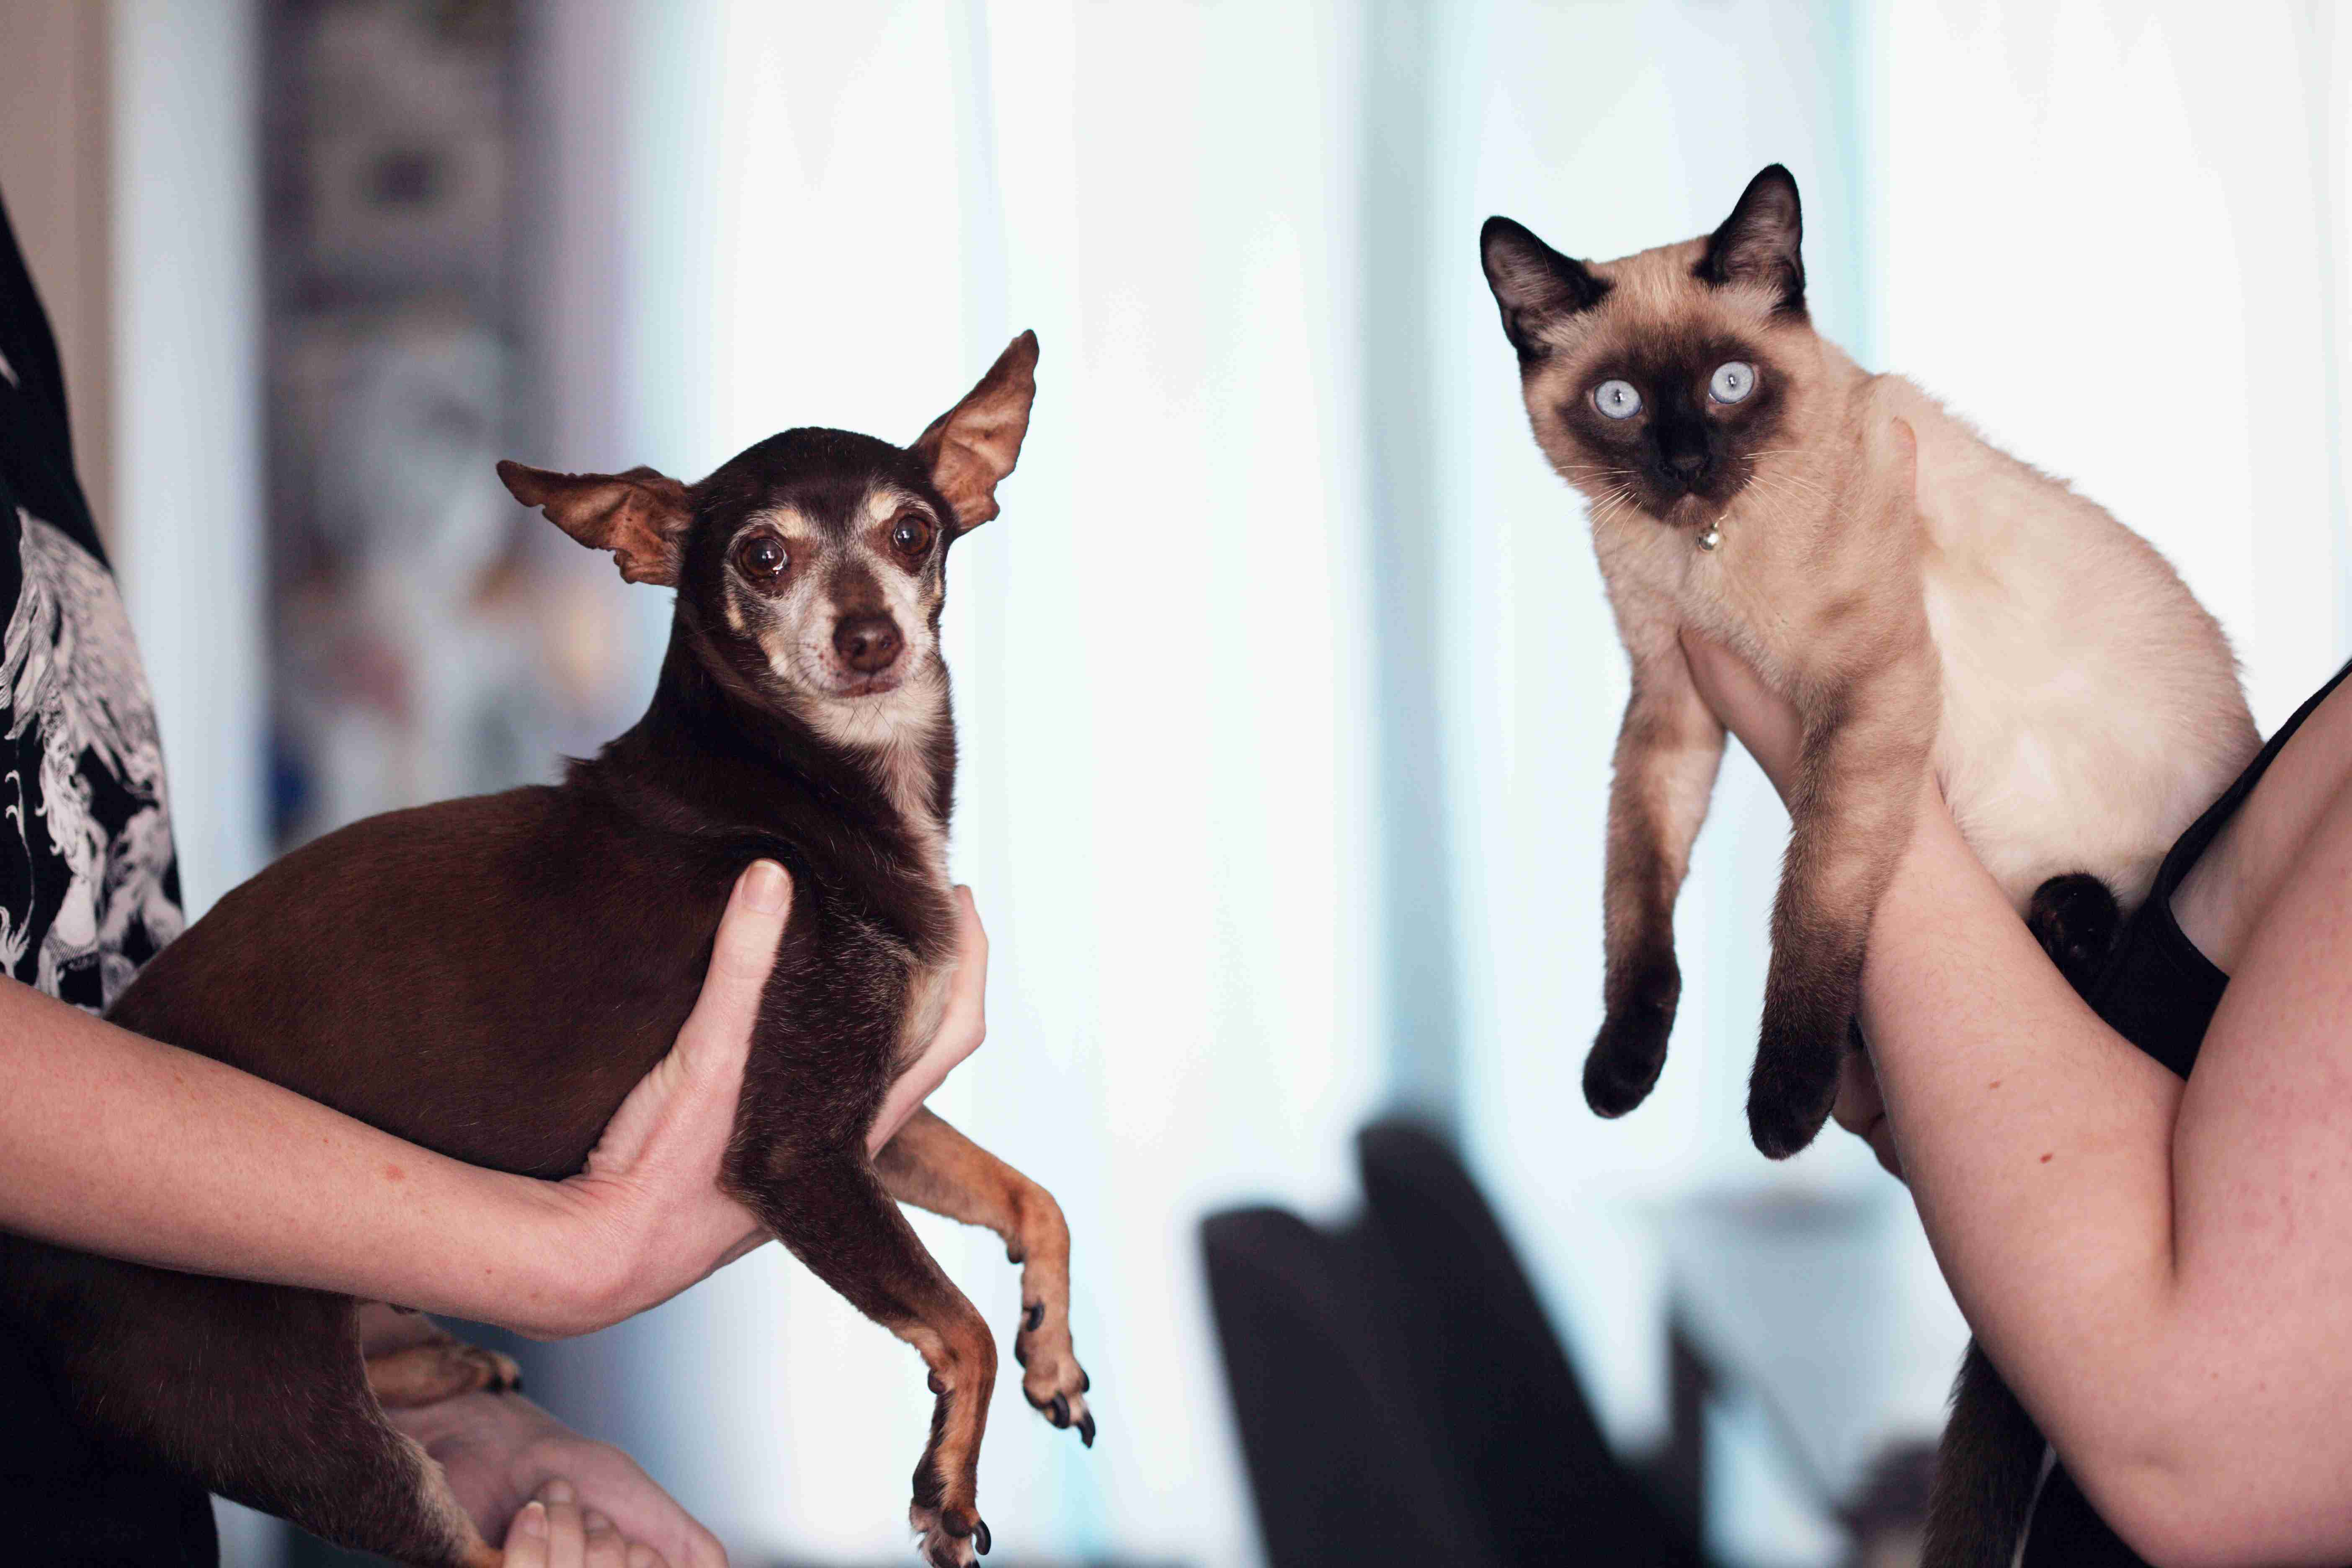 Can a Chihuahua's anger issues be triggered by specific body language or gestures?